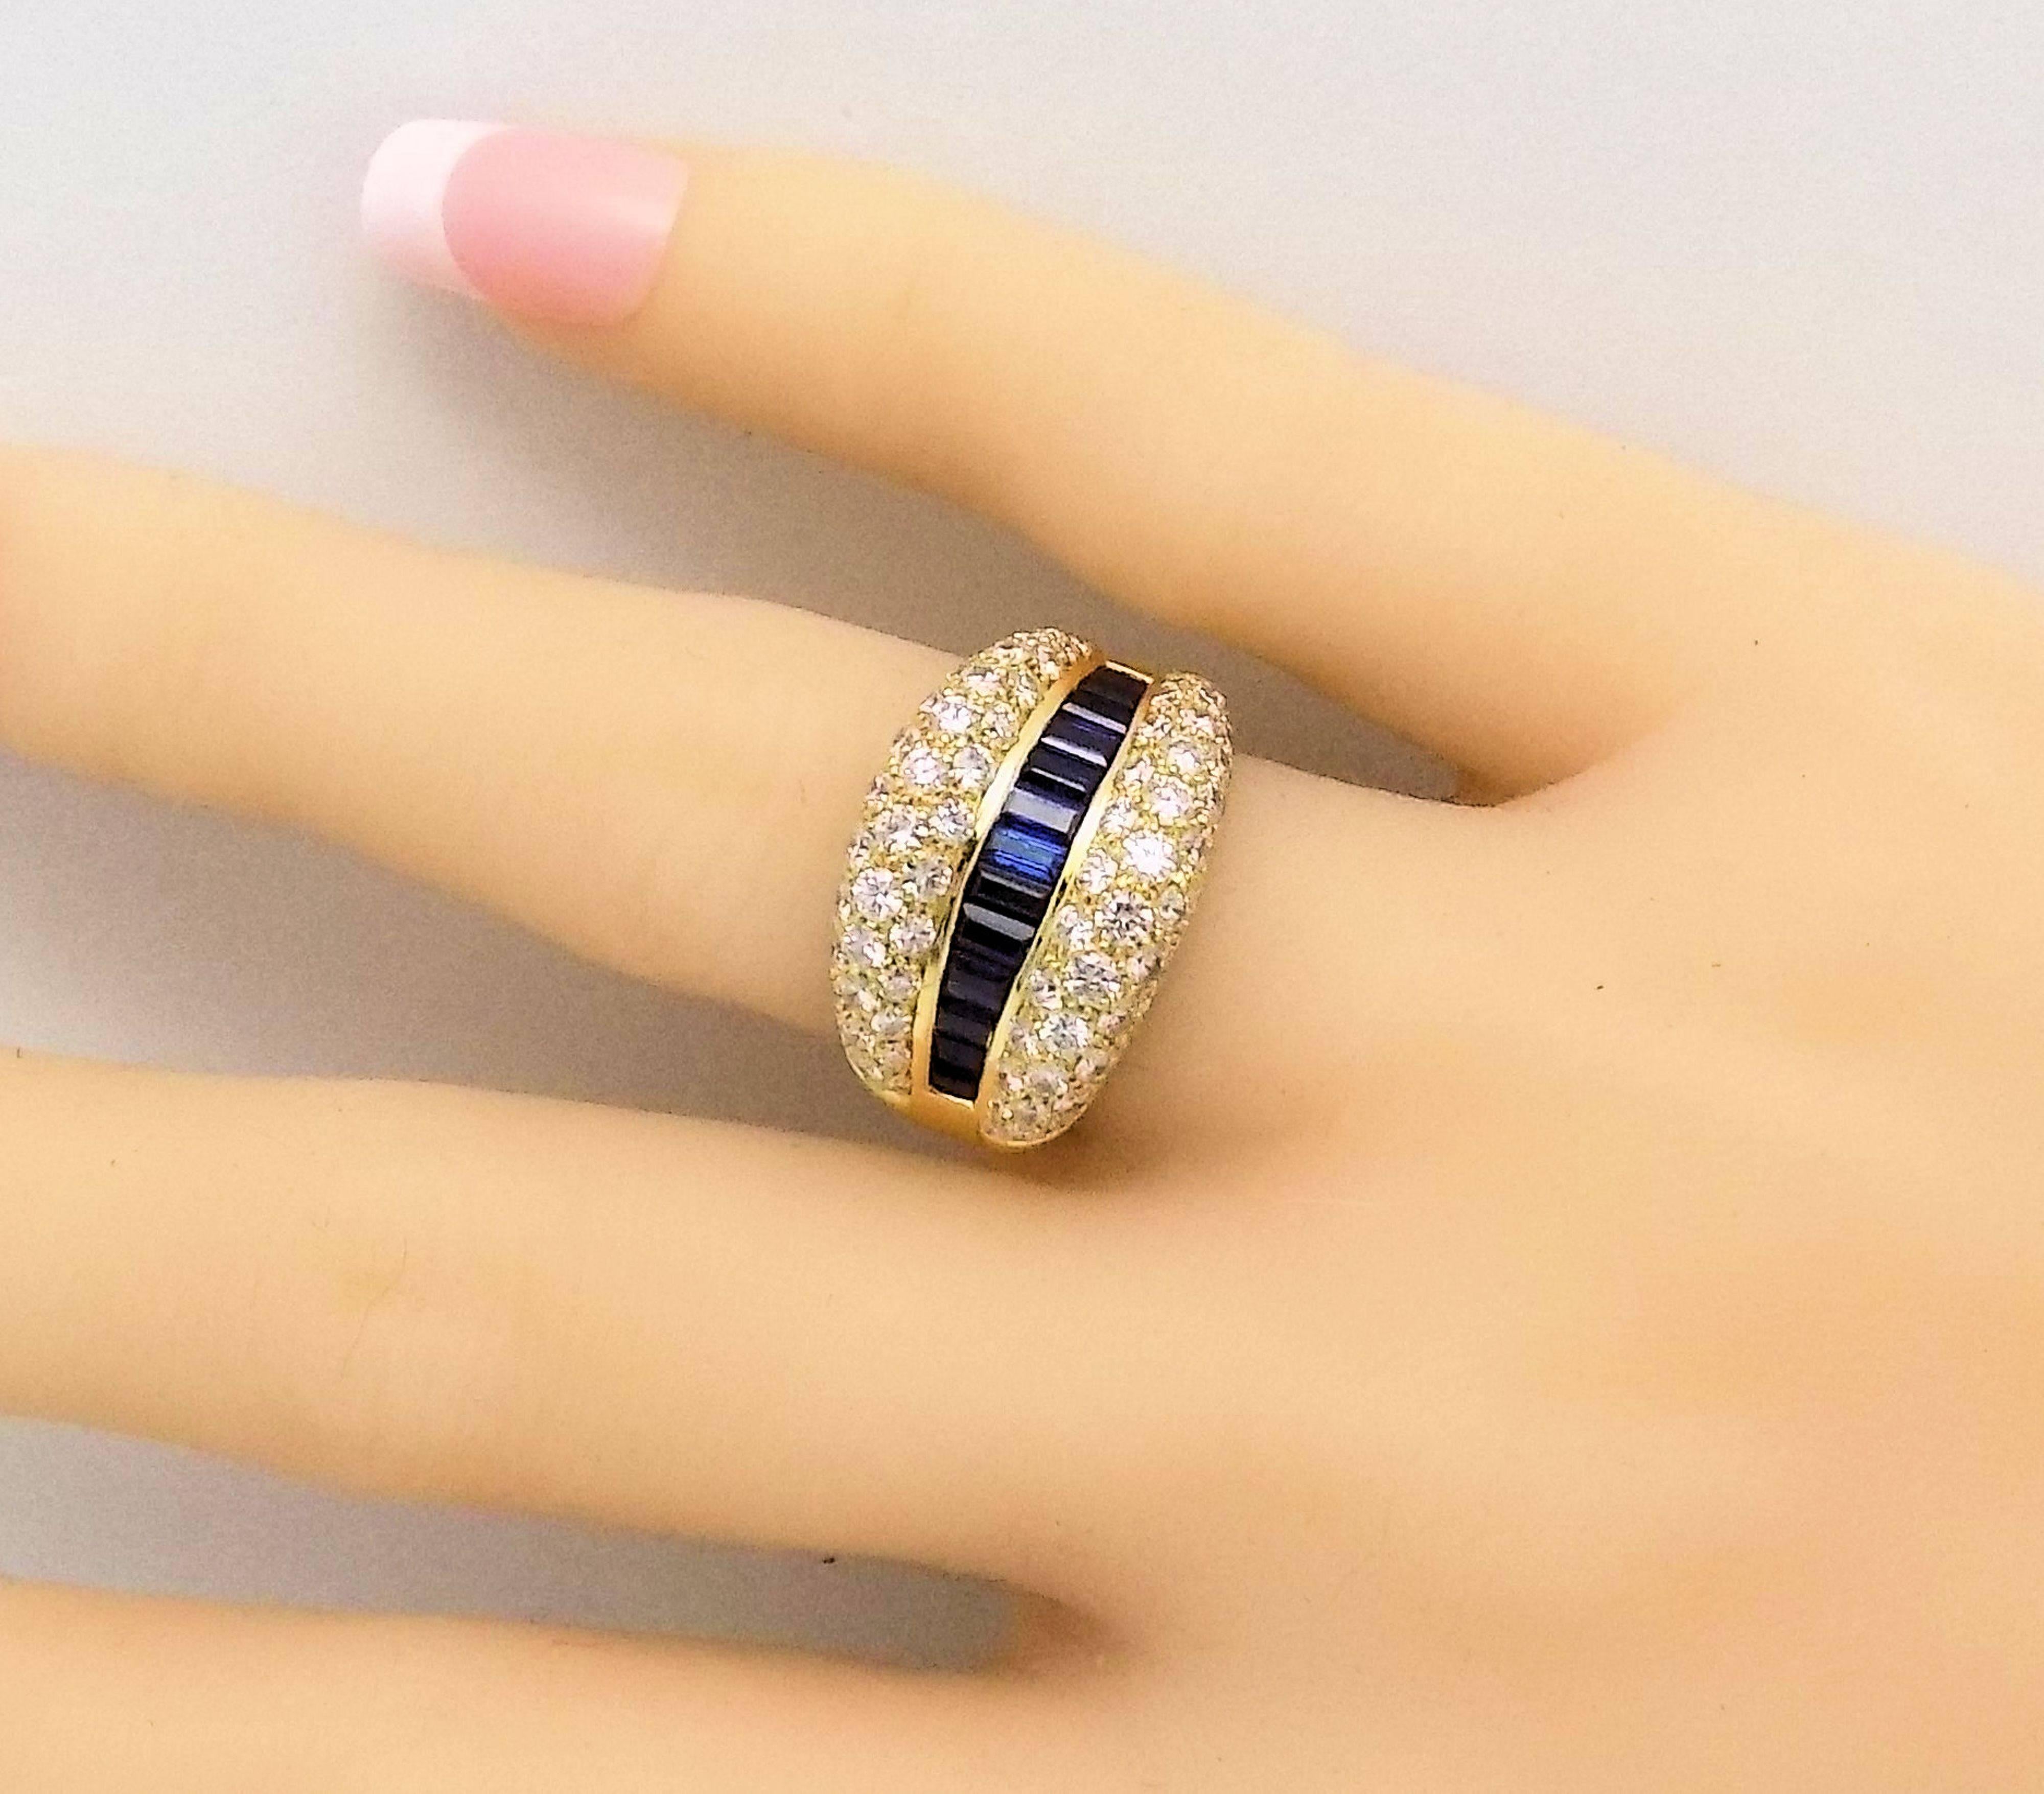 18 Karat Yellow Gold Ring with 88 Round Brilliant Diamonds, Pavé Set, 2.01 Carat Total Weight, VVS-2, H with Center Row of 13 Baguette Fine Sapphires, 1.41 Carat Total Weight. Finger Size:  6.25. Stamped: 750, 18K. 9.1 DWT or 14.15 Grams.